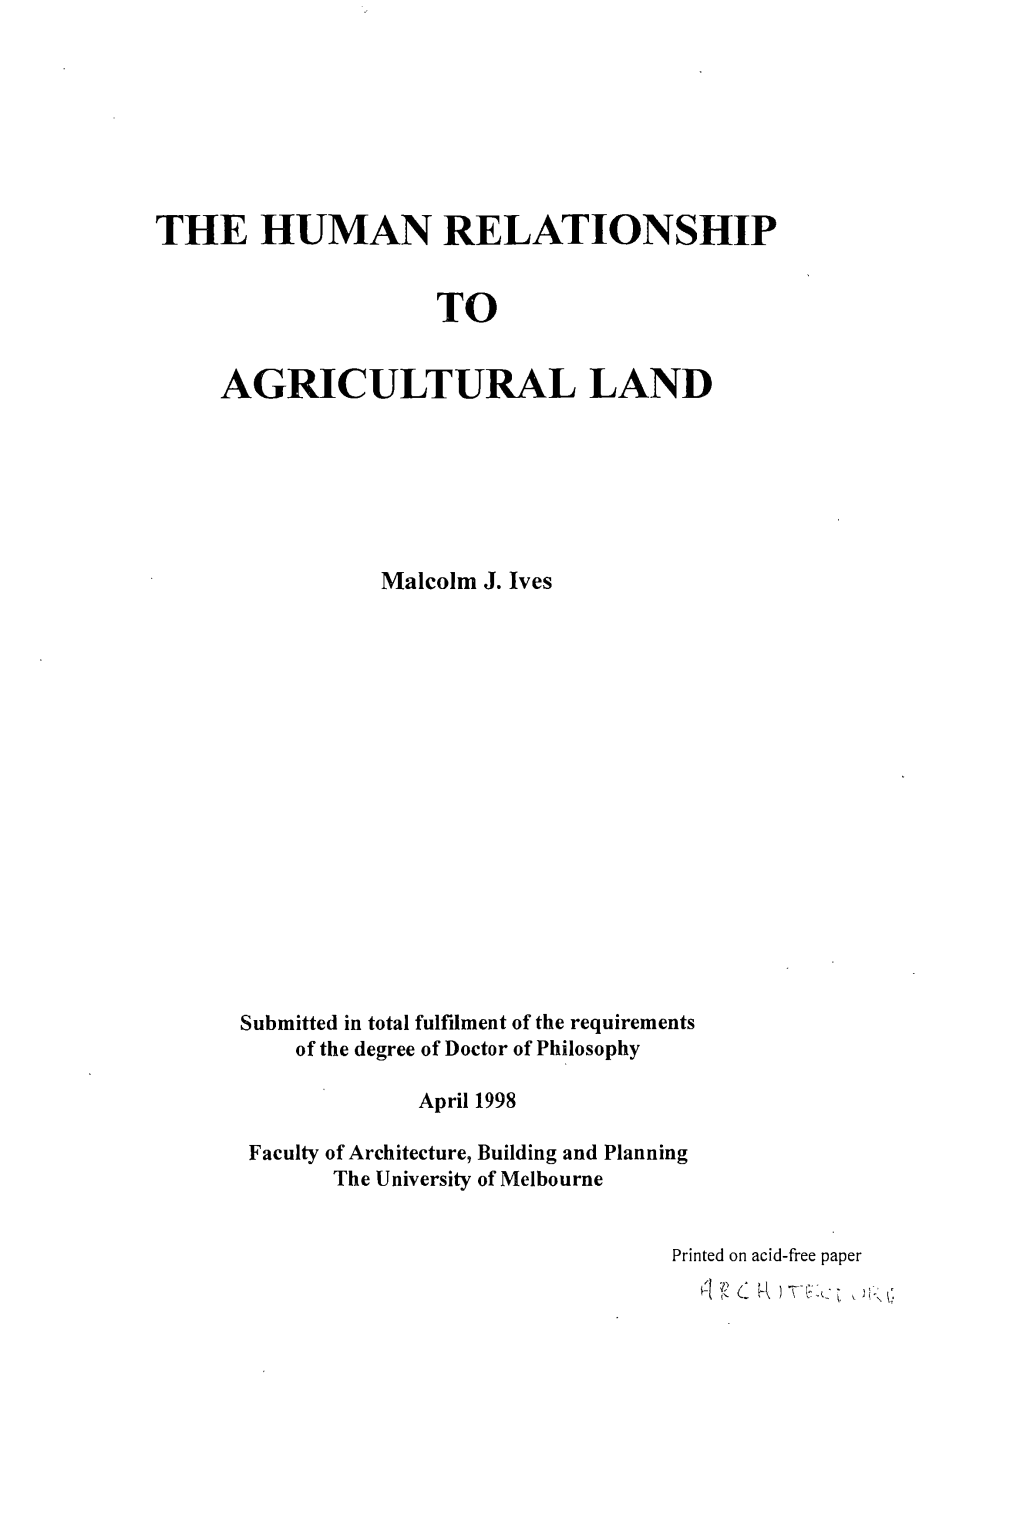 The Human Relationship to Agricultural Land